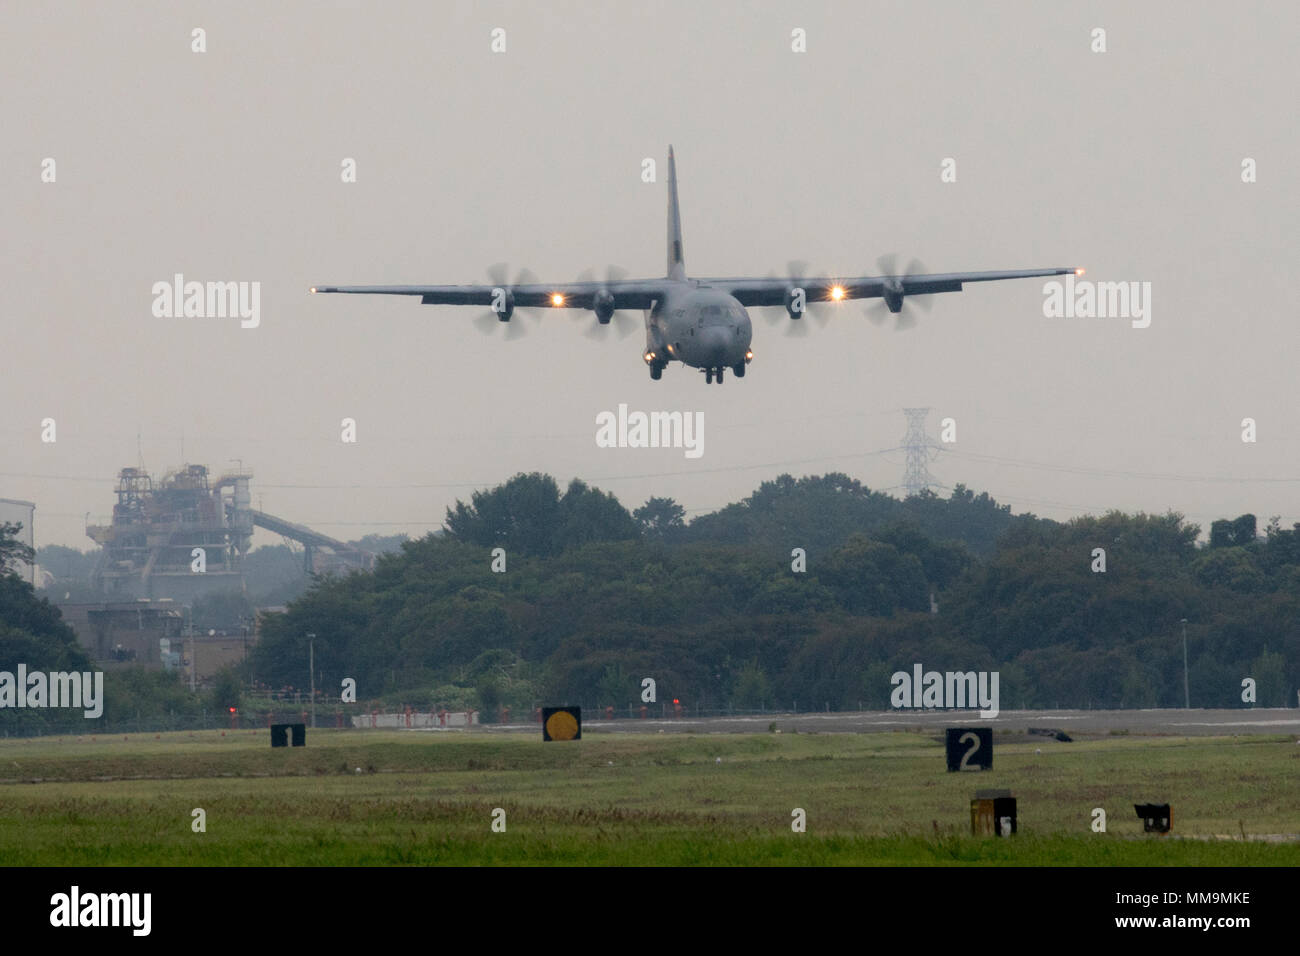 A C-130J Super Hercules approaches the runway at Yokota Air Base, Japan, Sept. 20, 2017. This is the fifth C-130J delivered to Yokota and the first from Ramstein Air Base, Germany. Crewmembers from the 36th Airlift Squadron flew halfway around the world to deliver this C-130J here. (U.S. Air Force photo by Yasuo Osakabe) Stock Photo